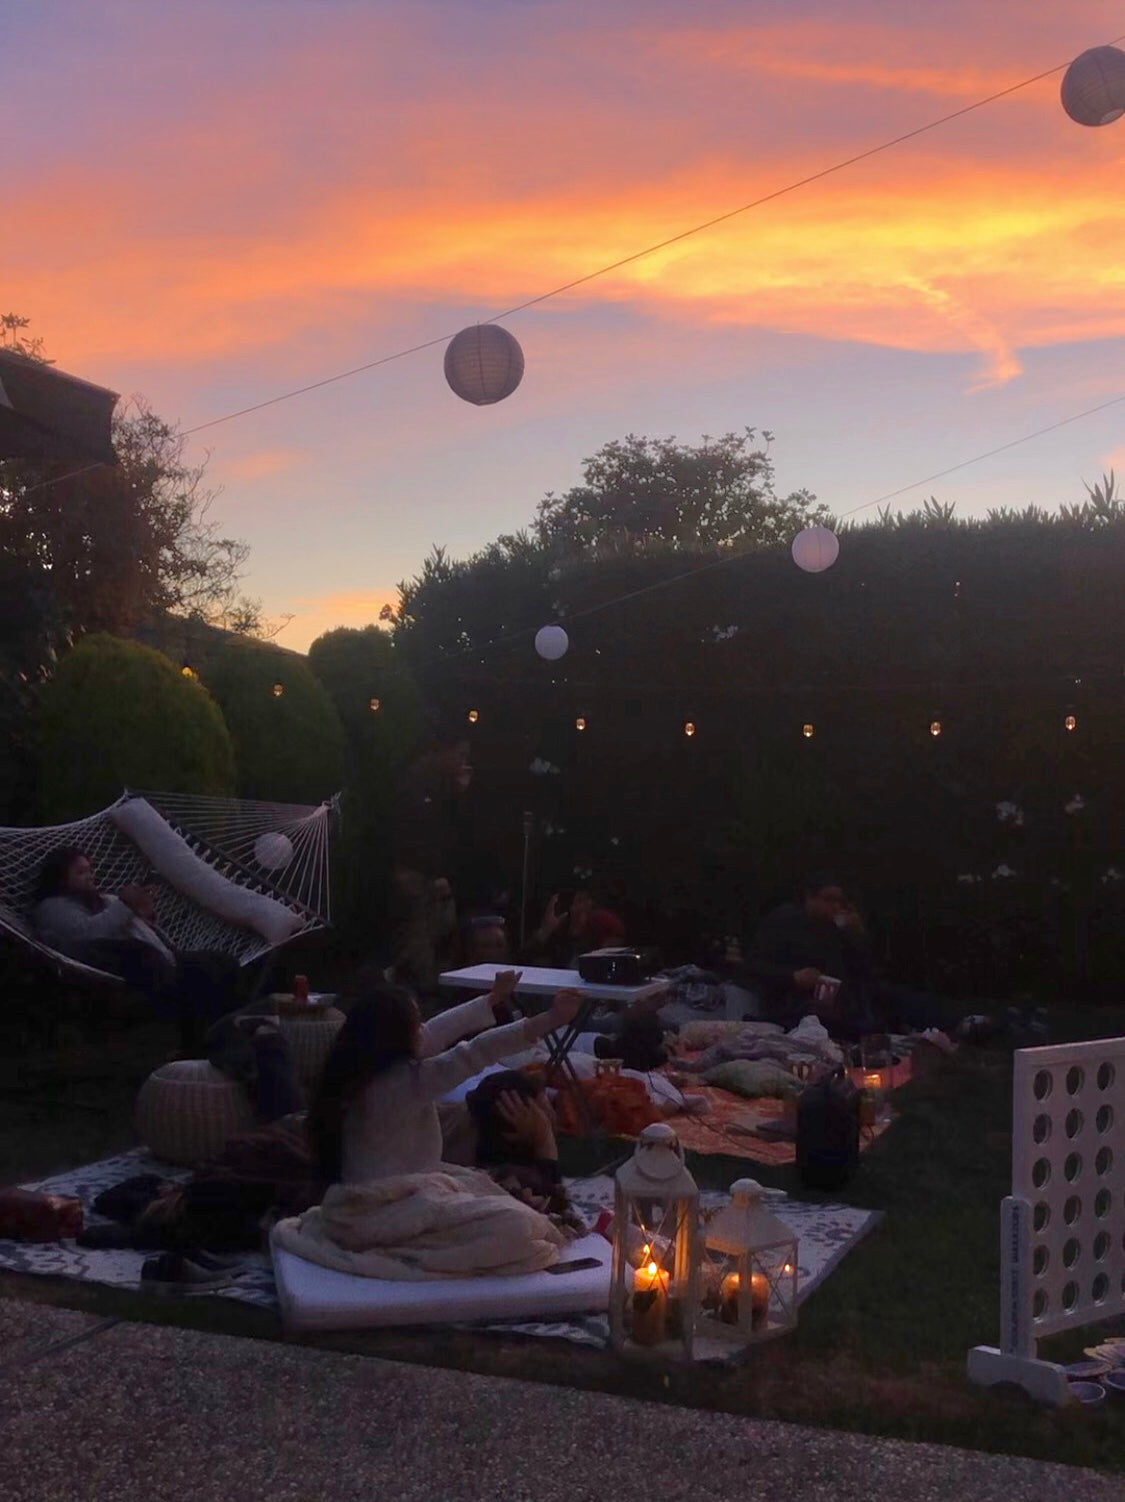 Sunset for Outdoor Movie Night Birthday Party - Boho Birthday - Backyard Movie Night at Sunset - Pretty Collected